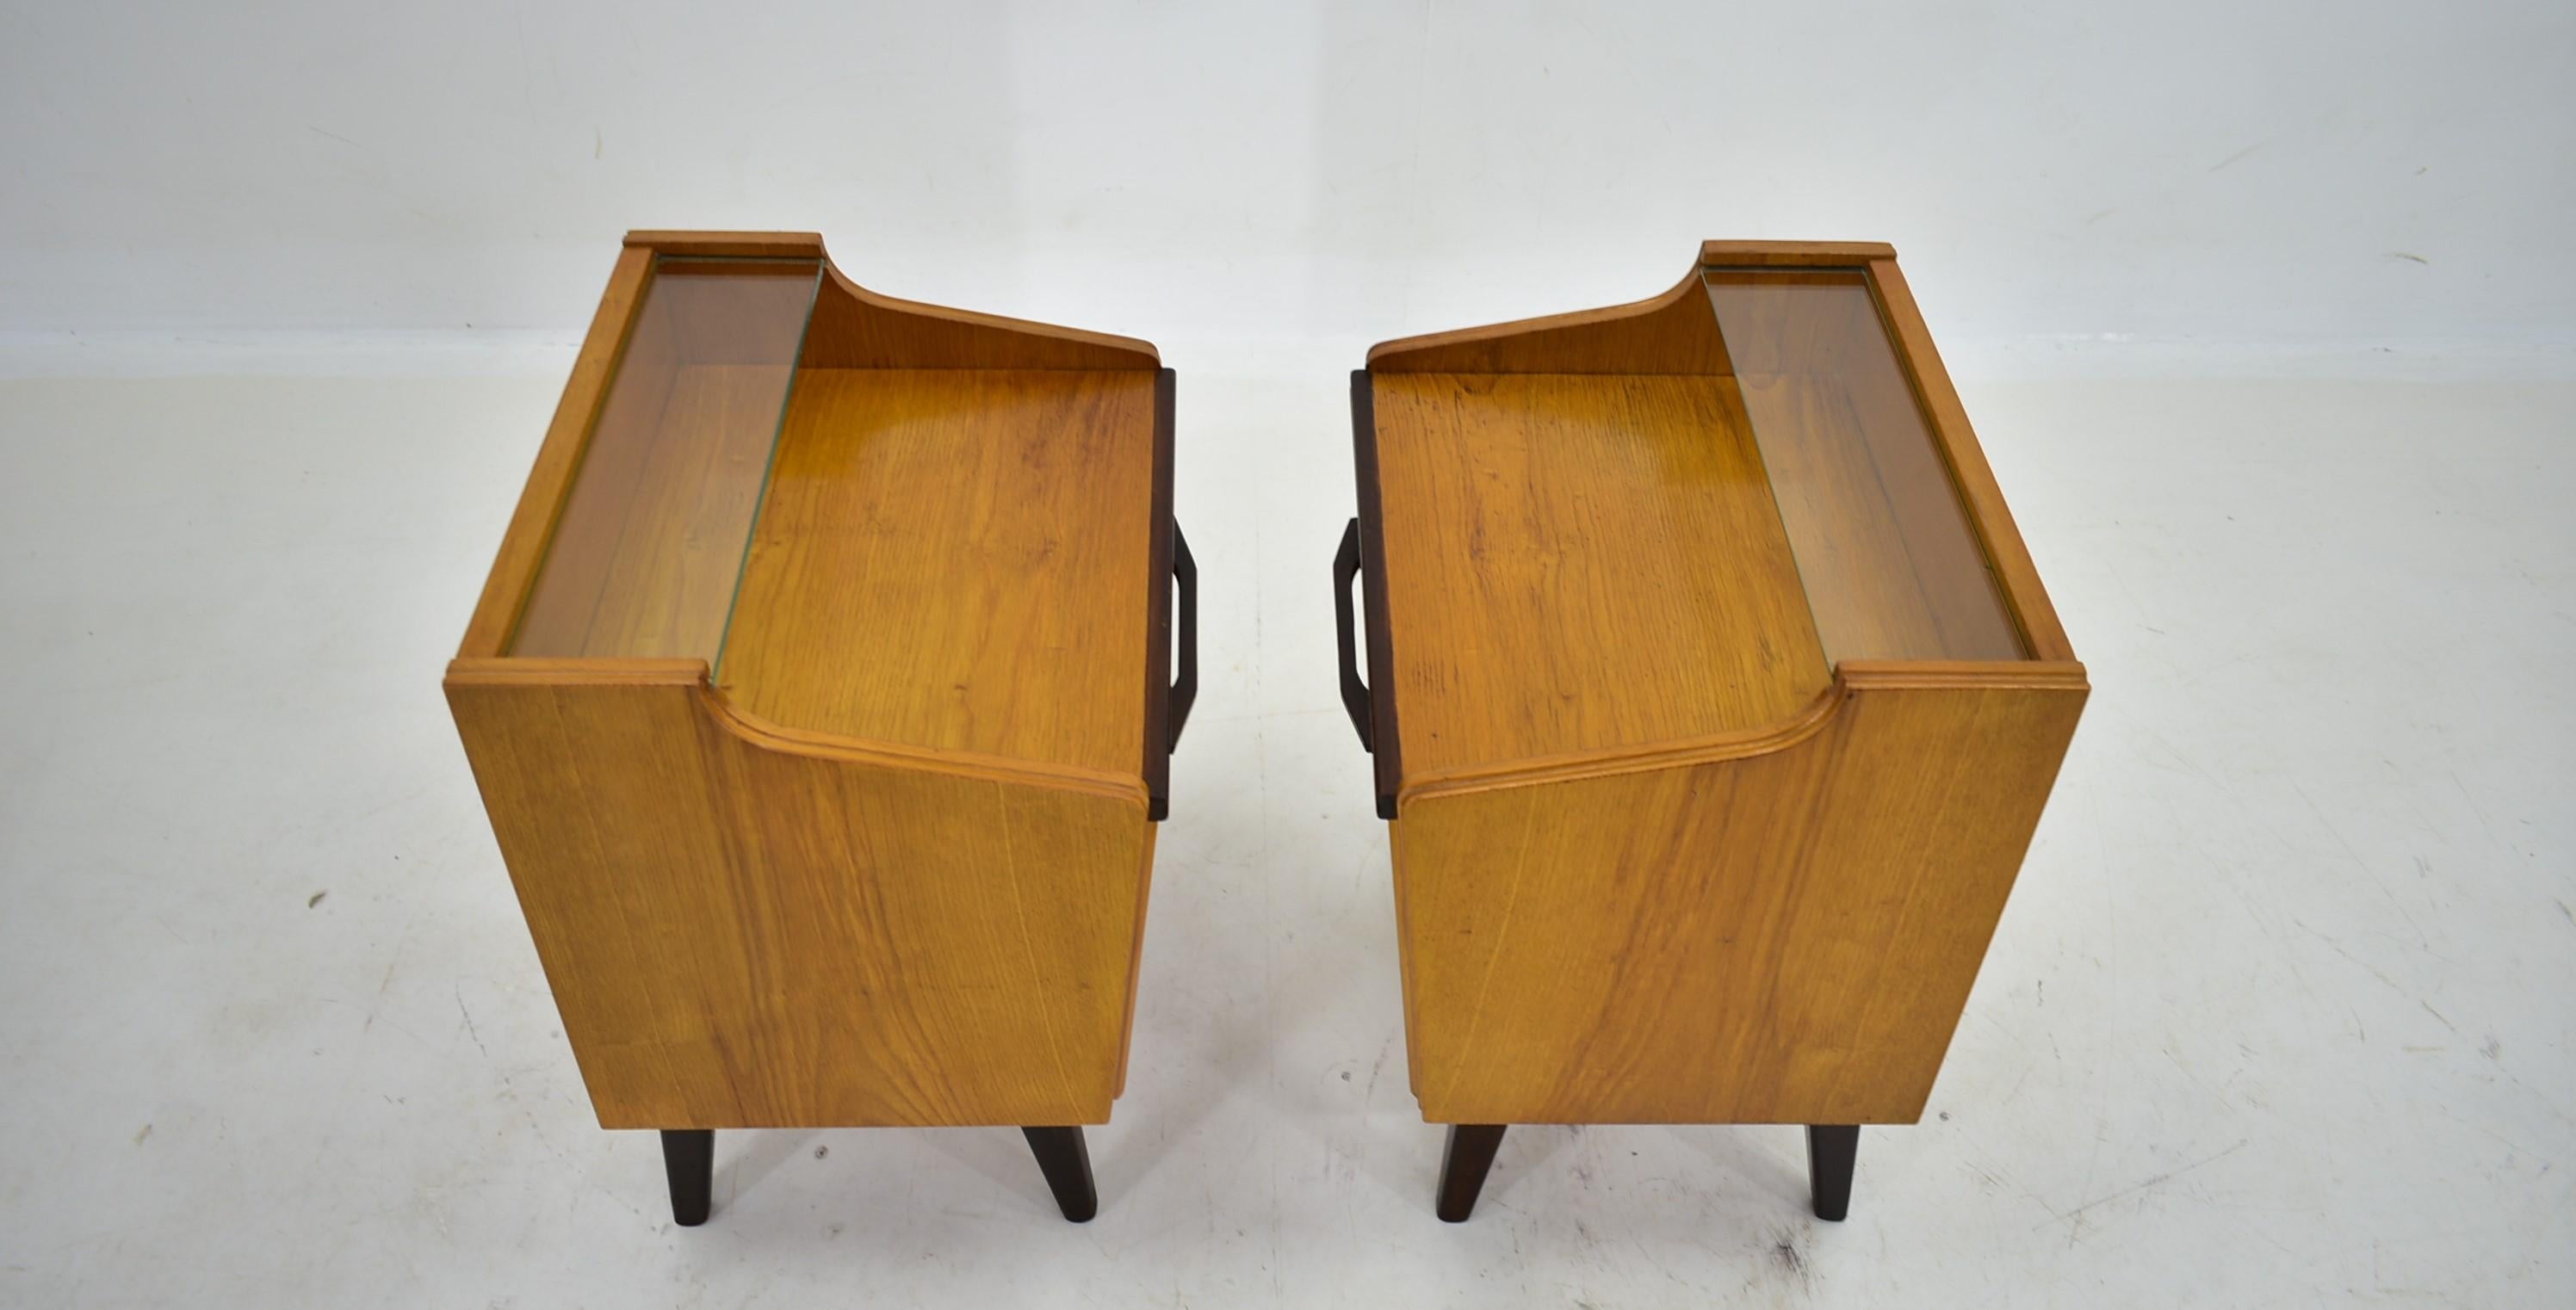 1960s Pair of Midcentury Bedside Tables by Mojmir Požár, Czechoslovakia For Sale 9